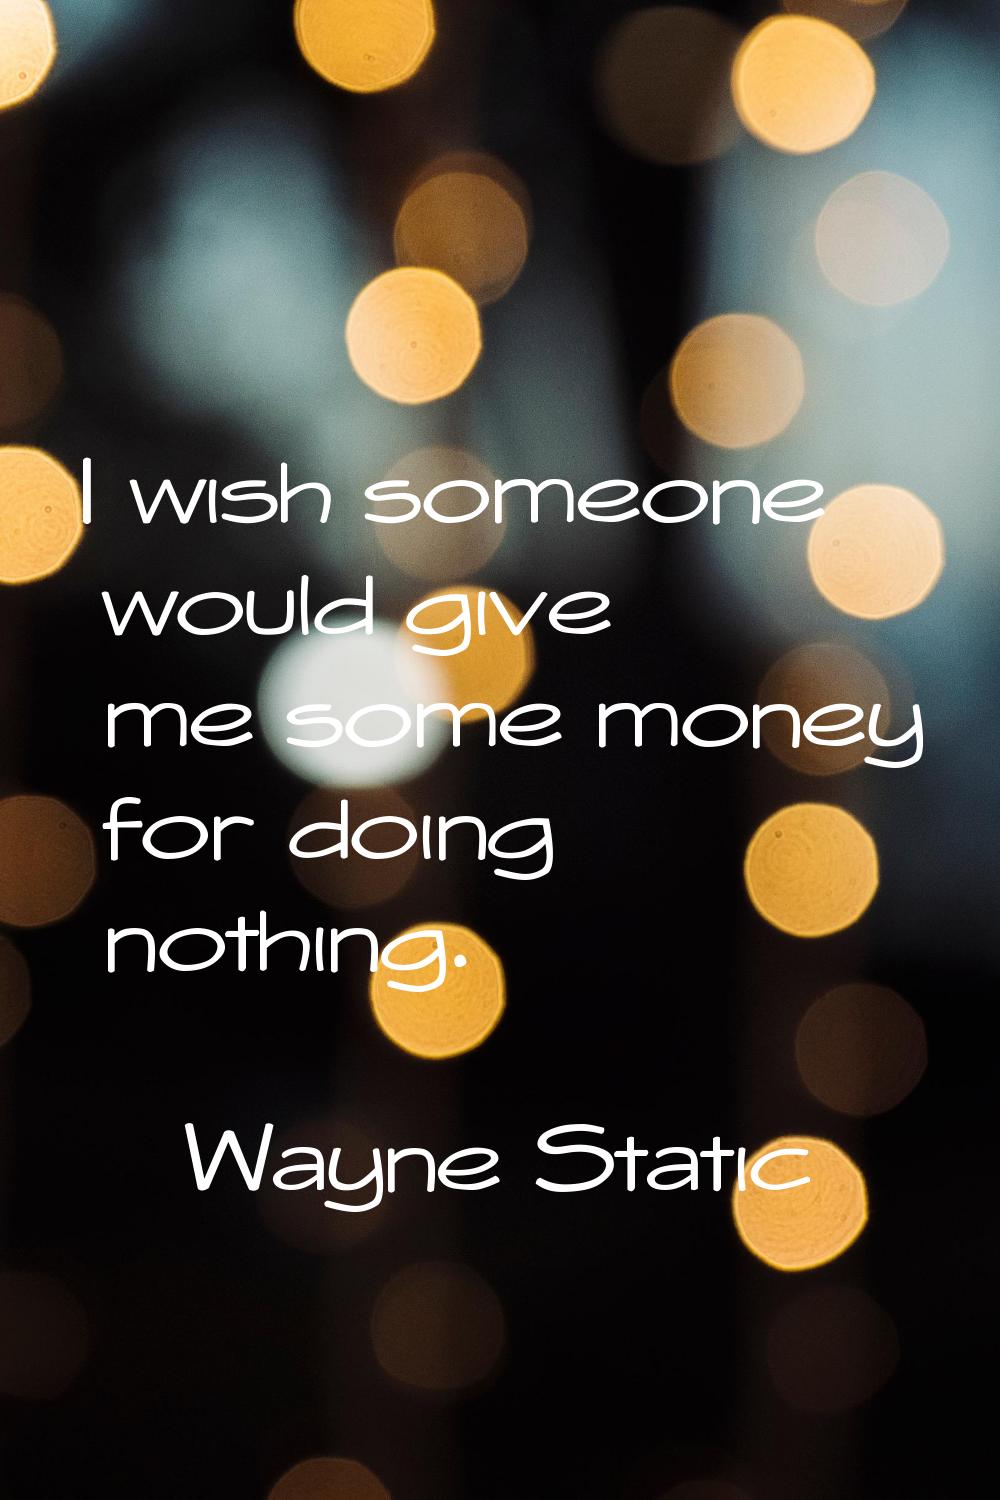 I wish someone would give me some money for doing nothing.